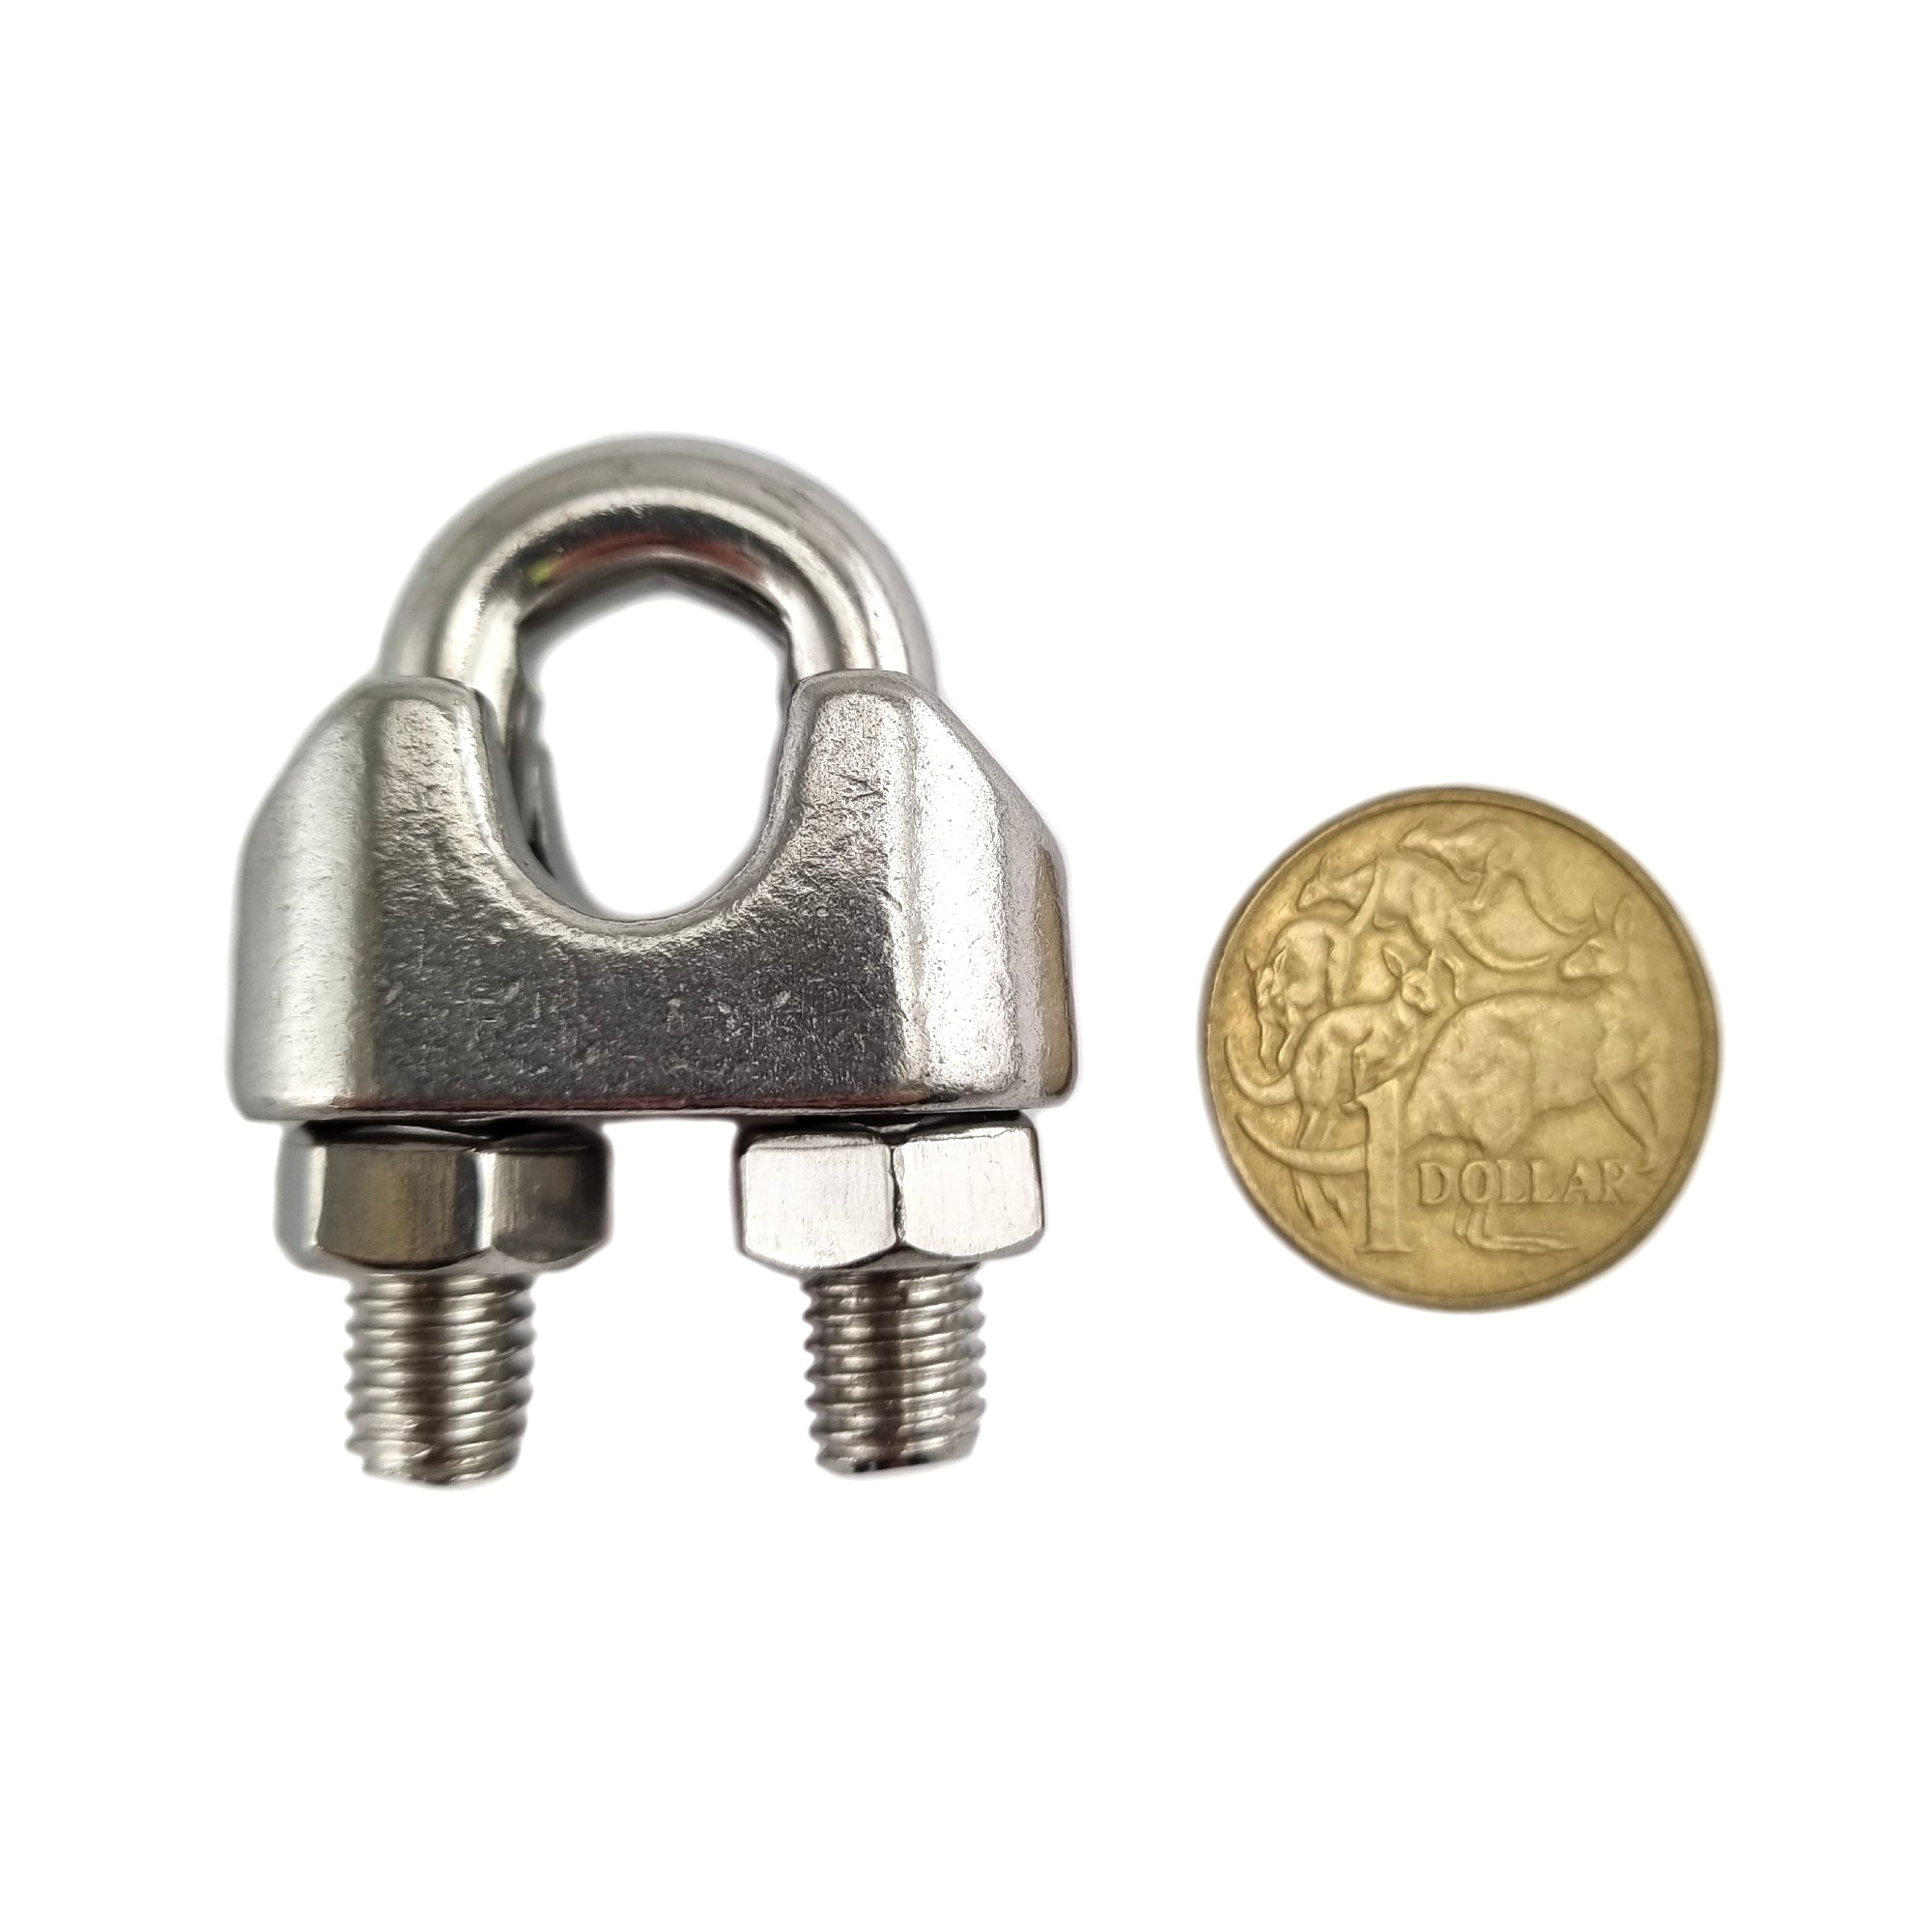 Stainless steel type 316 cable clamp, size 12mm. Shop cable clamps and balustrade supplies online. Australia wide delivery. chain.com.au